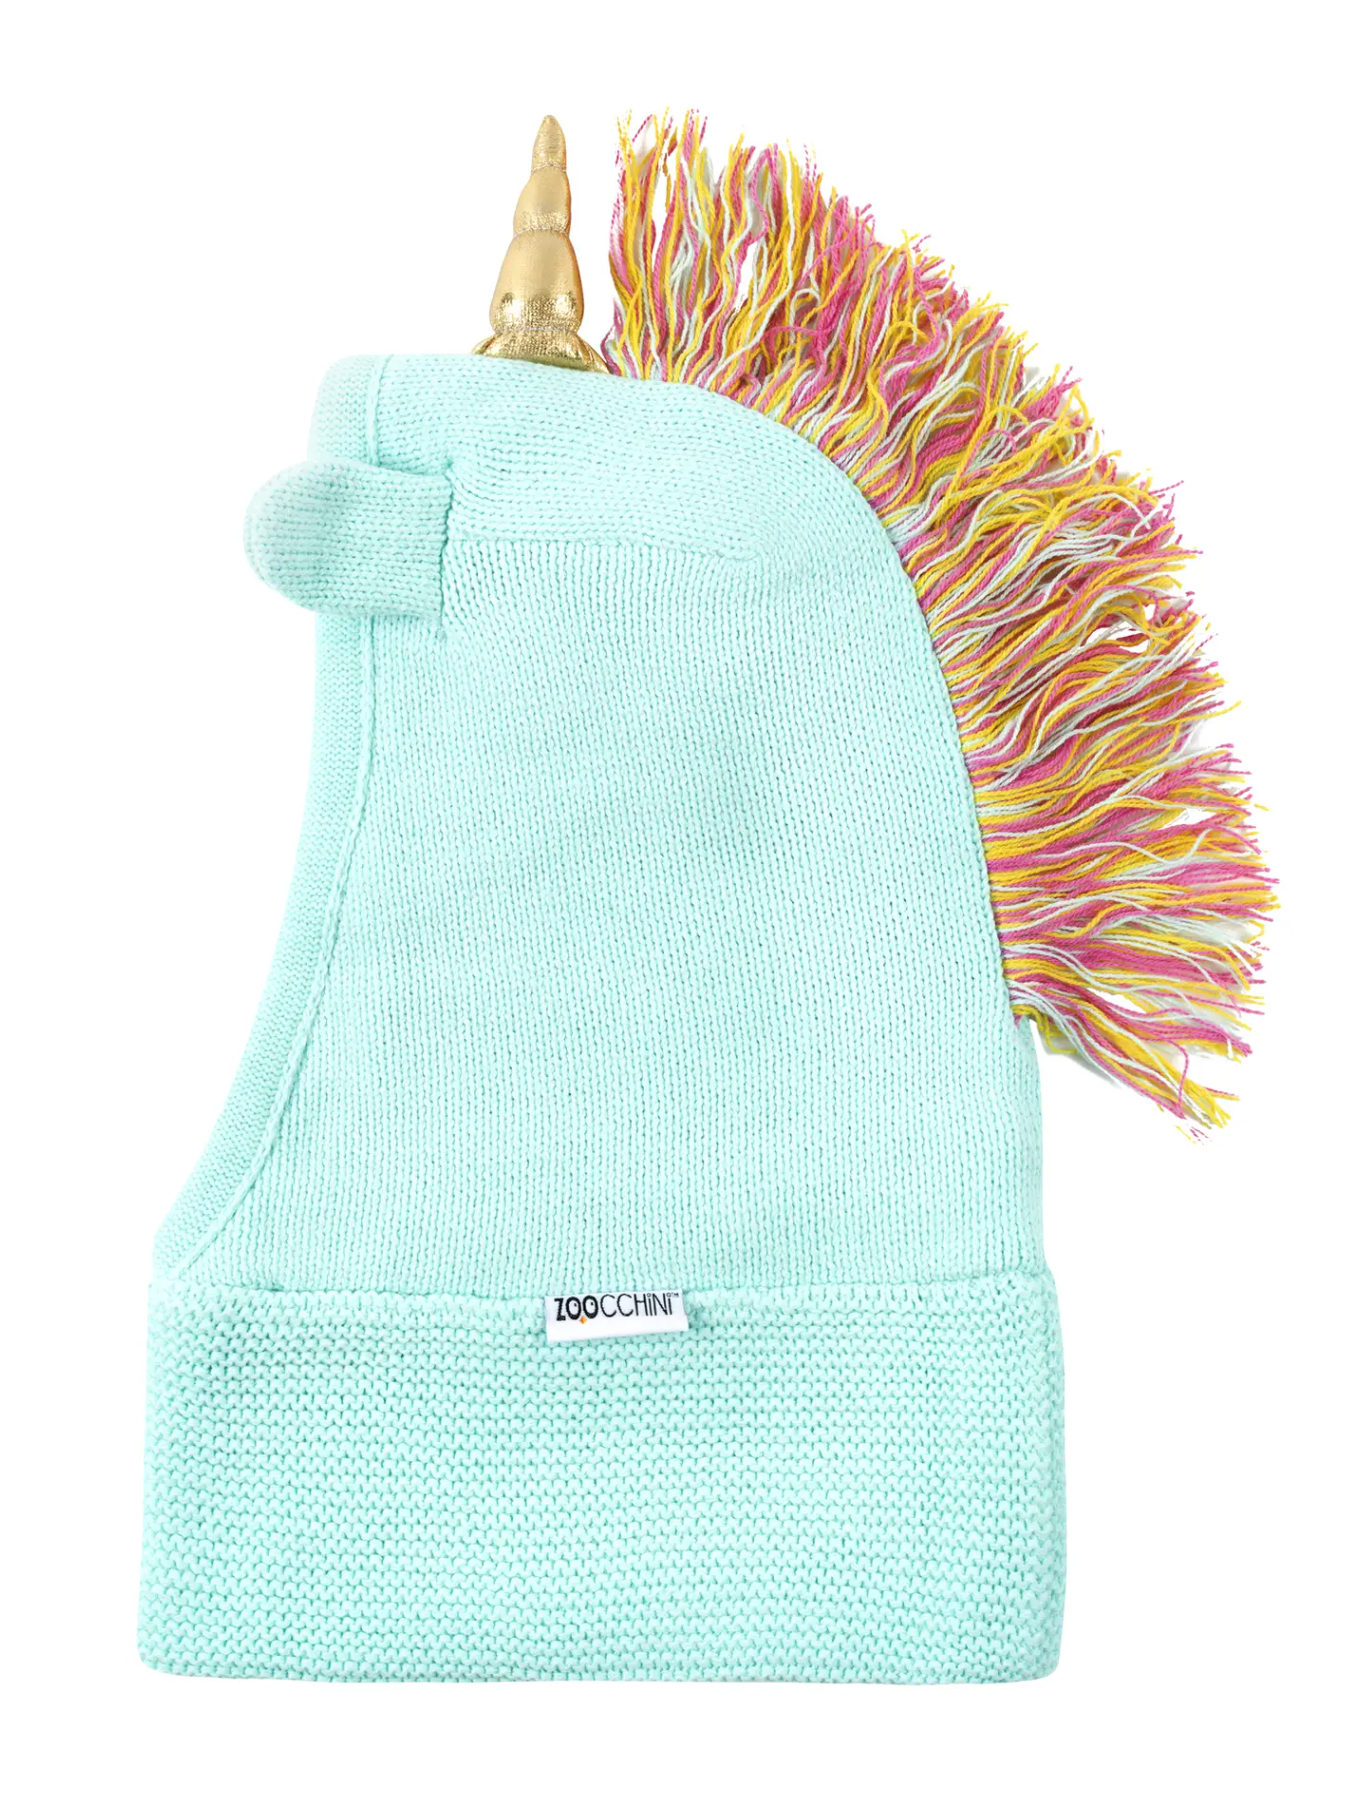 ZOOCCHINI BABY/TODDLER KNIT BALACLAVA HAT - ALLIE THE ALICORN-12-24 months